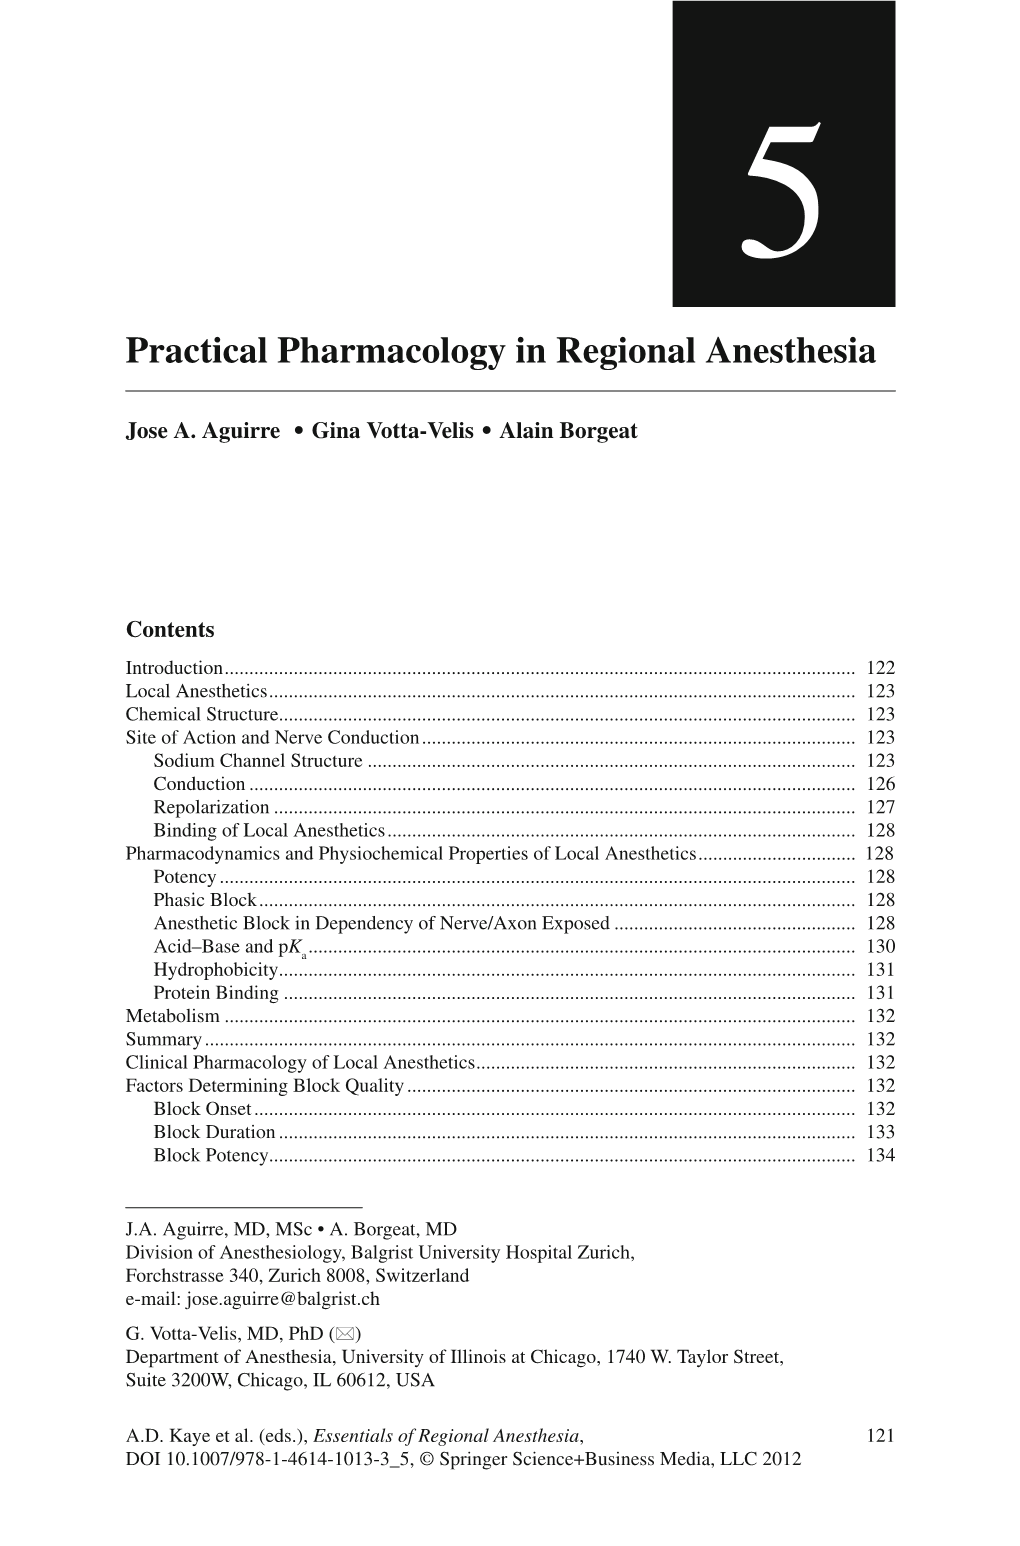 Practical Pharmacology in Regional Anesthesia